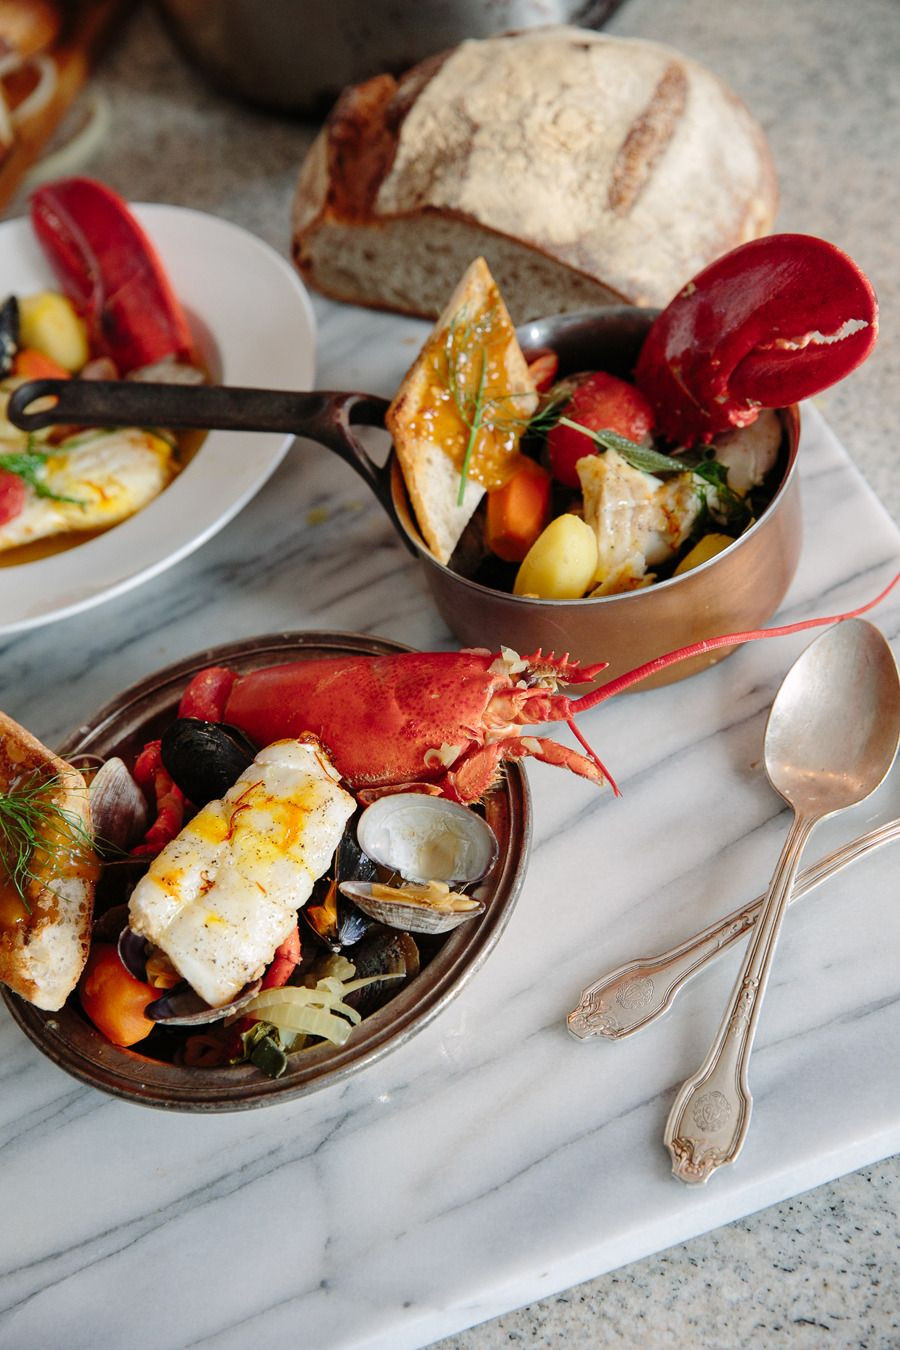 Seafood Menu Ideas For Dinner Party
 The Perfect Dinner Party Menu in 2019